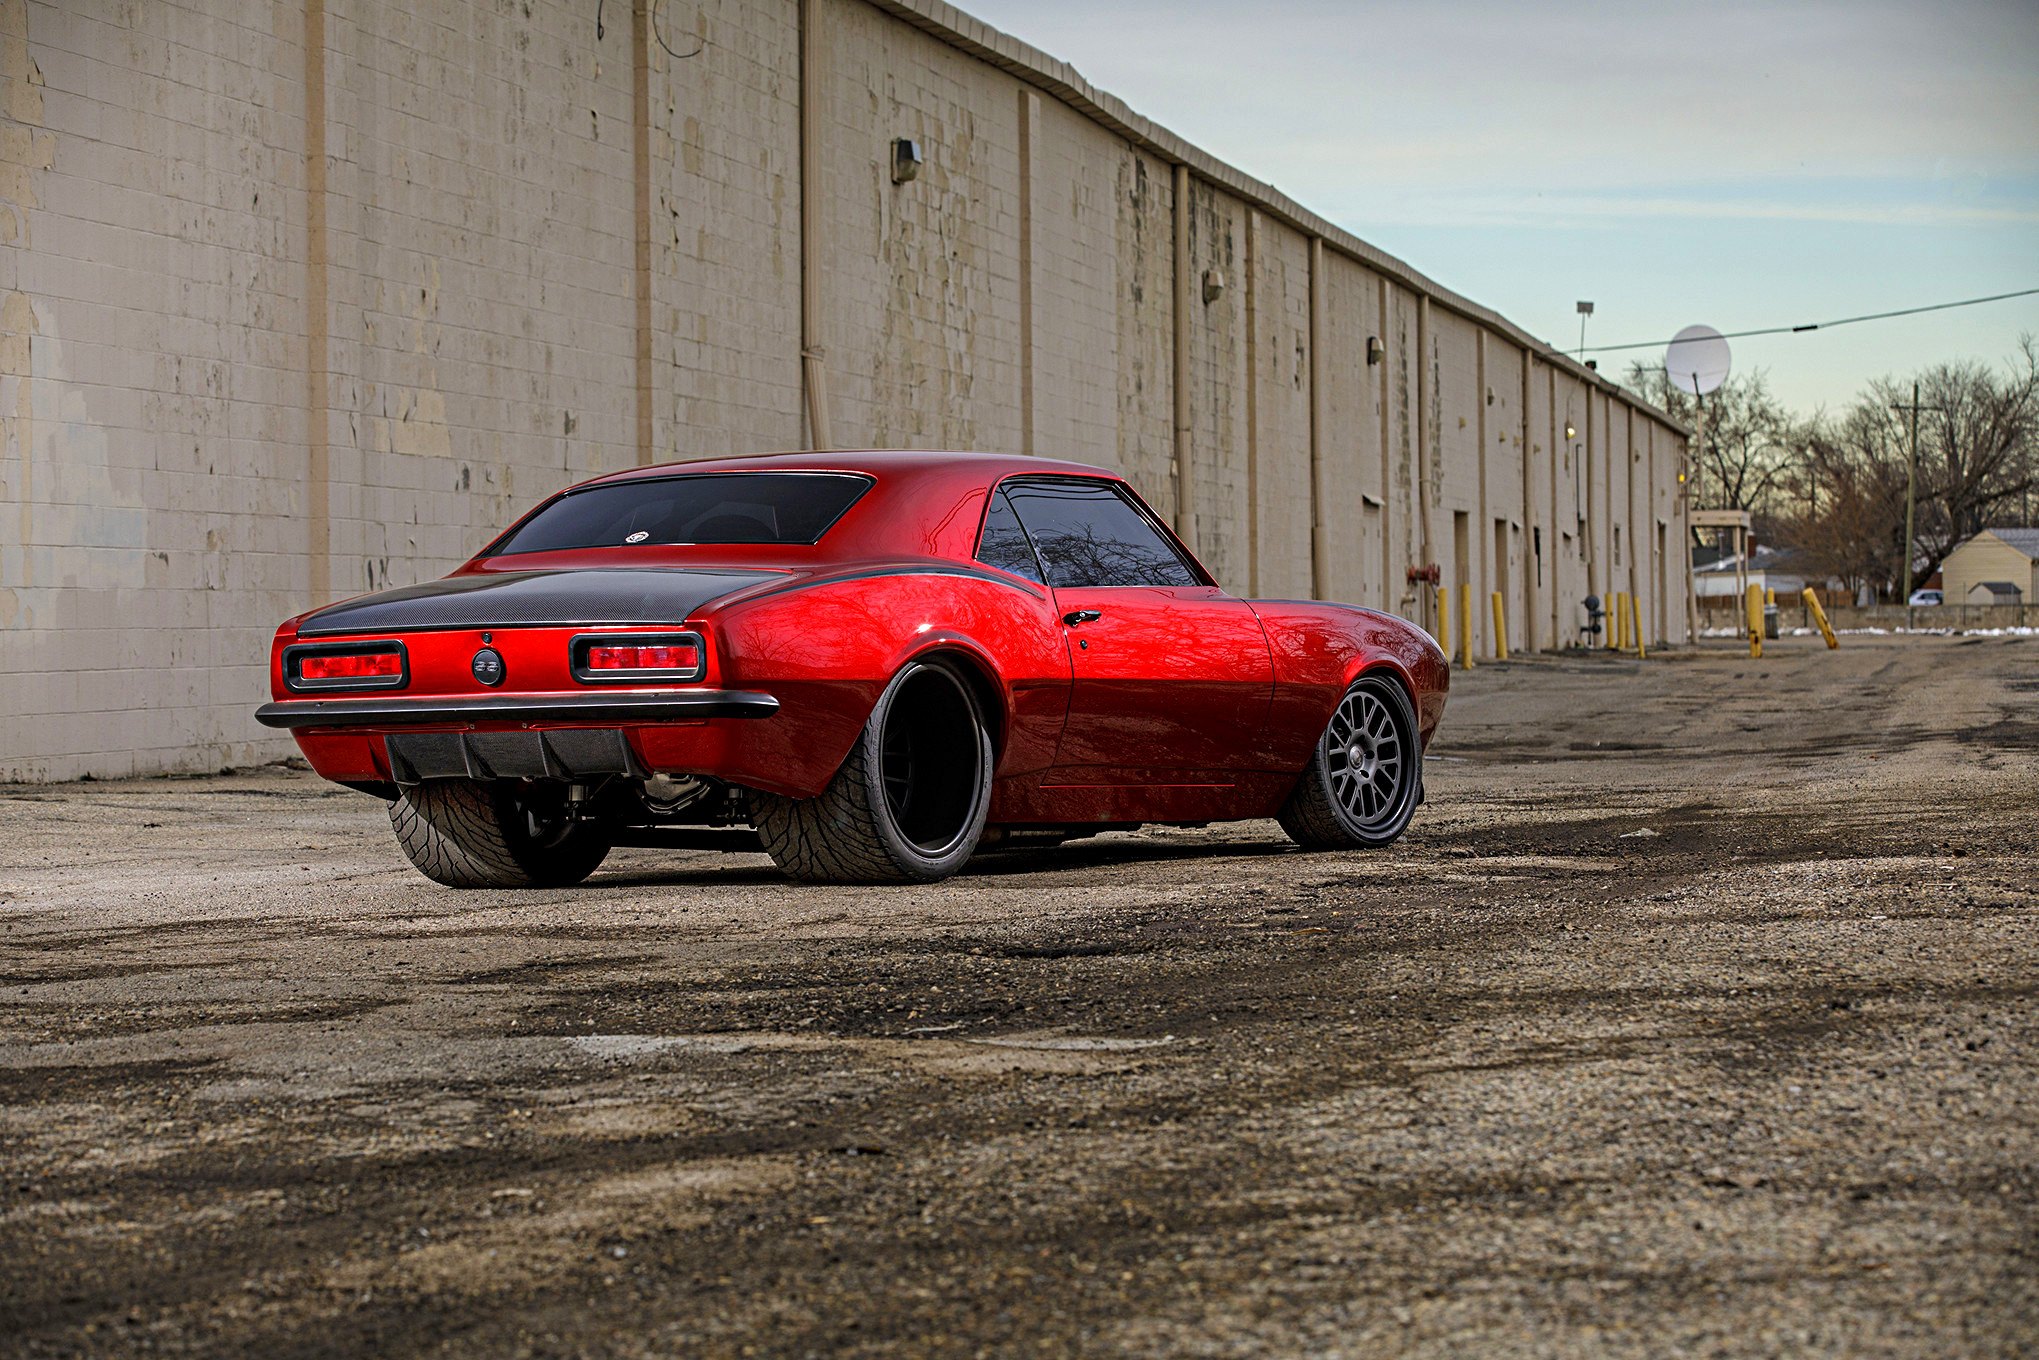 Red Chevy Camaro with Carbon Fiber Rear Bumper - Photo by Robert McGaffin